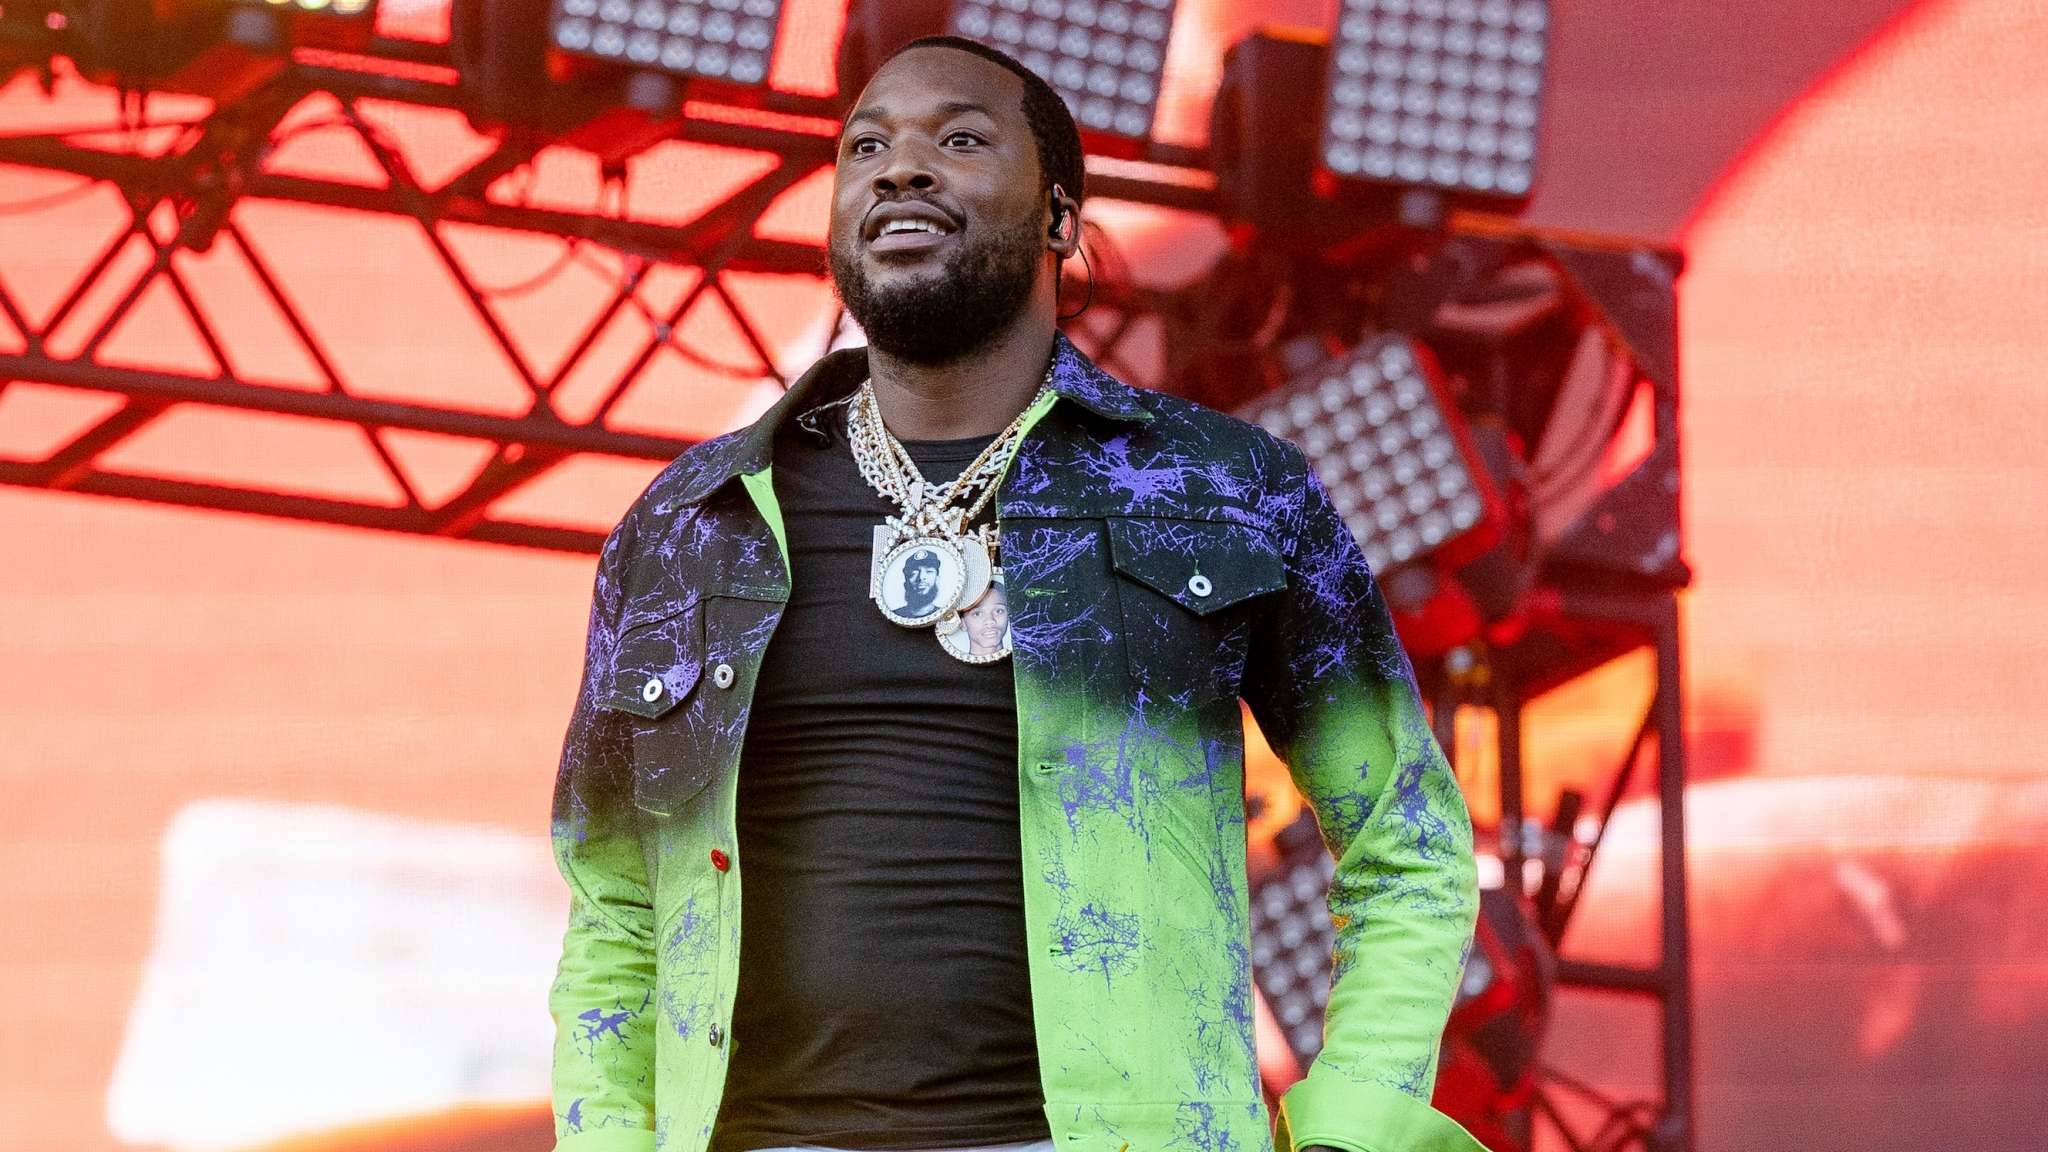 meek-mill-releases-the-video-for-blue-notes-2-here-are-fans-reactions